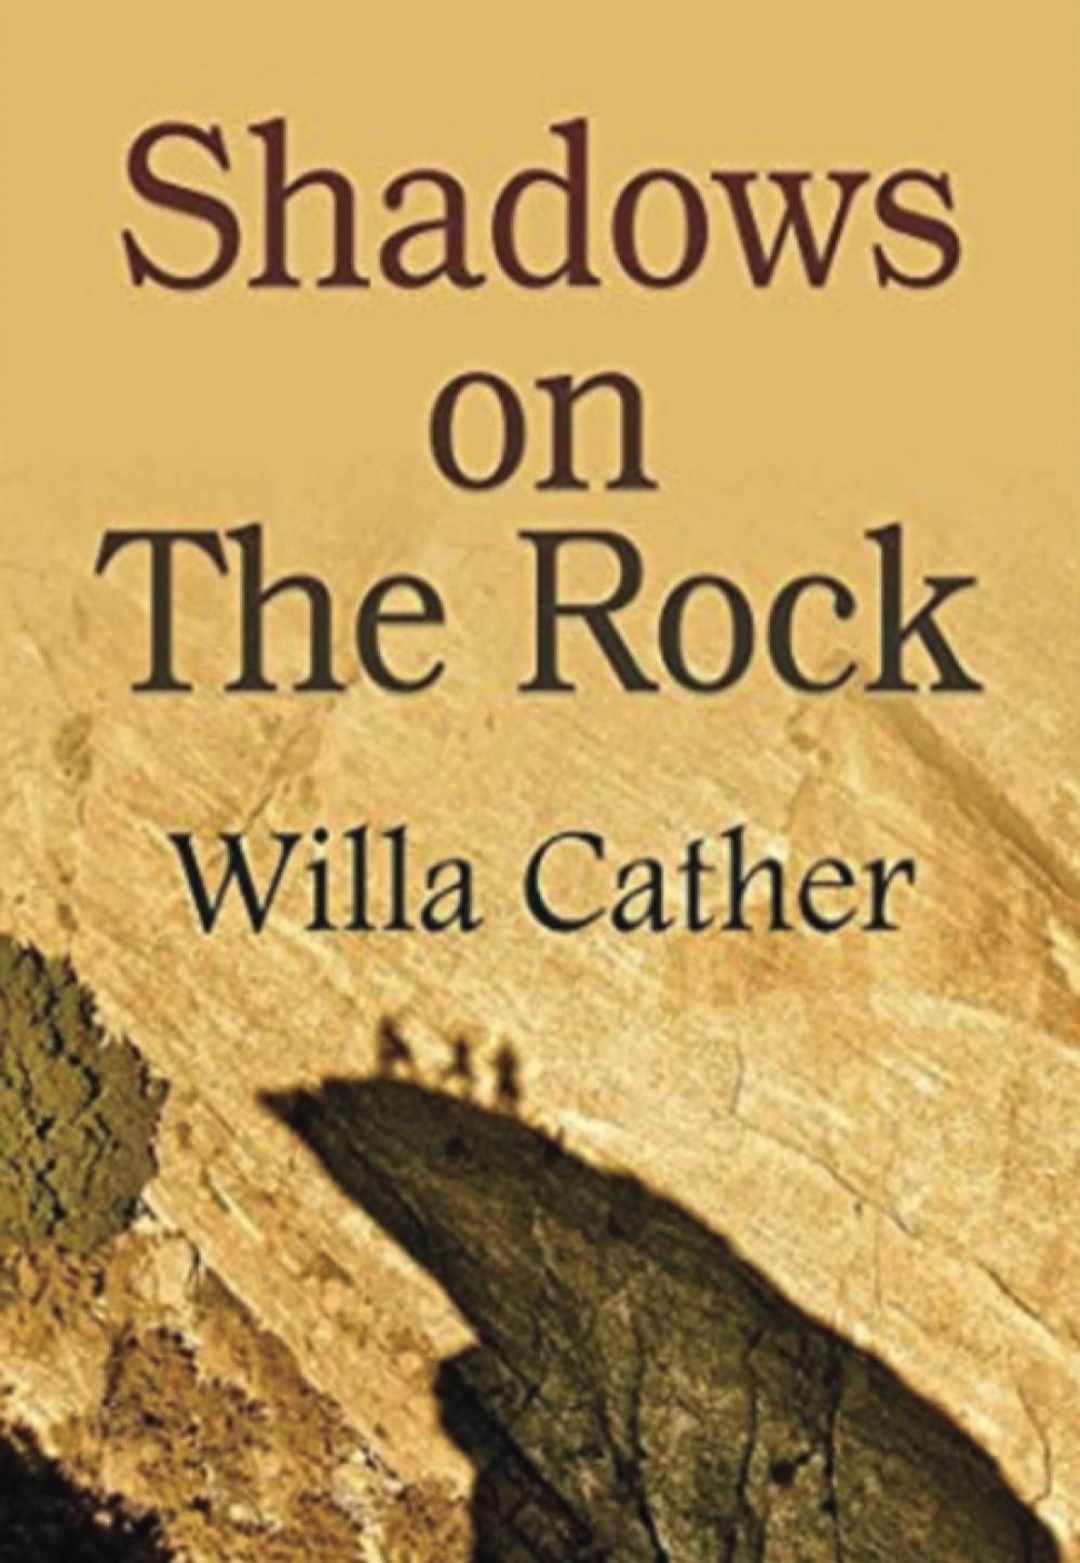 Shadows on the Rock by Willa Cather